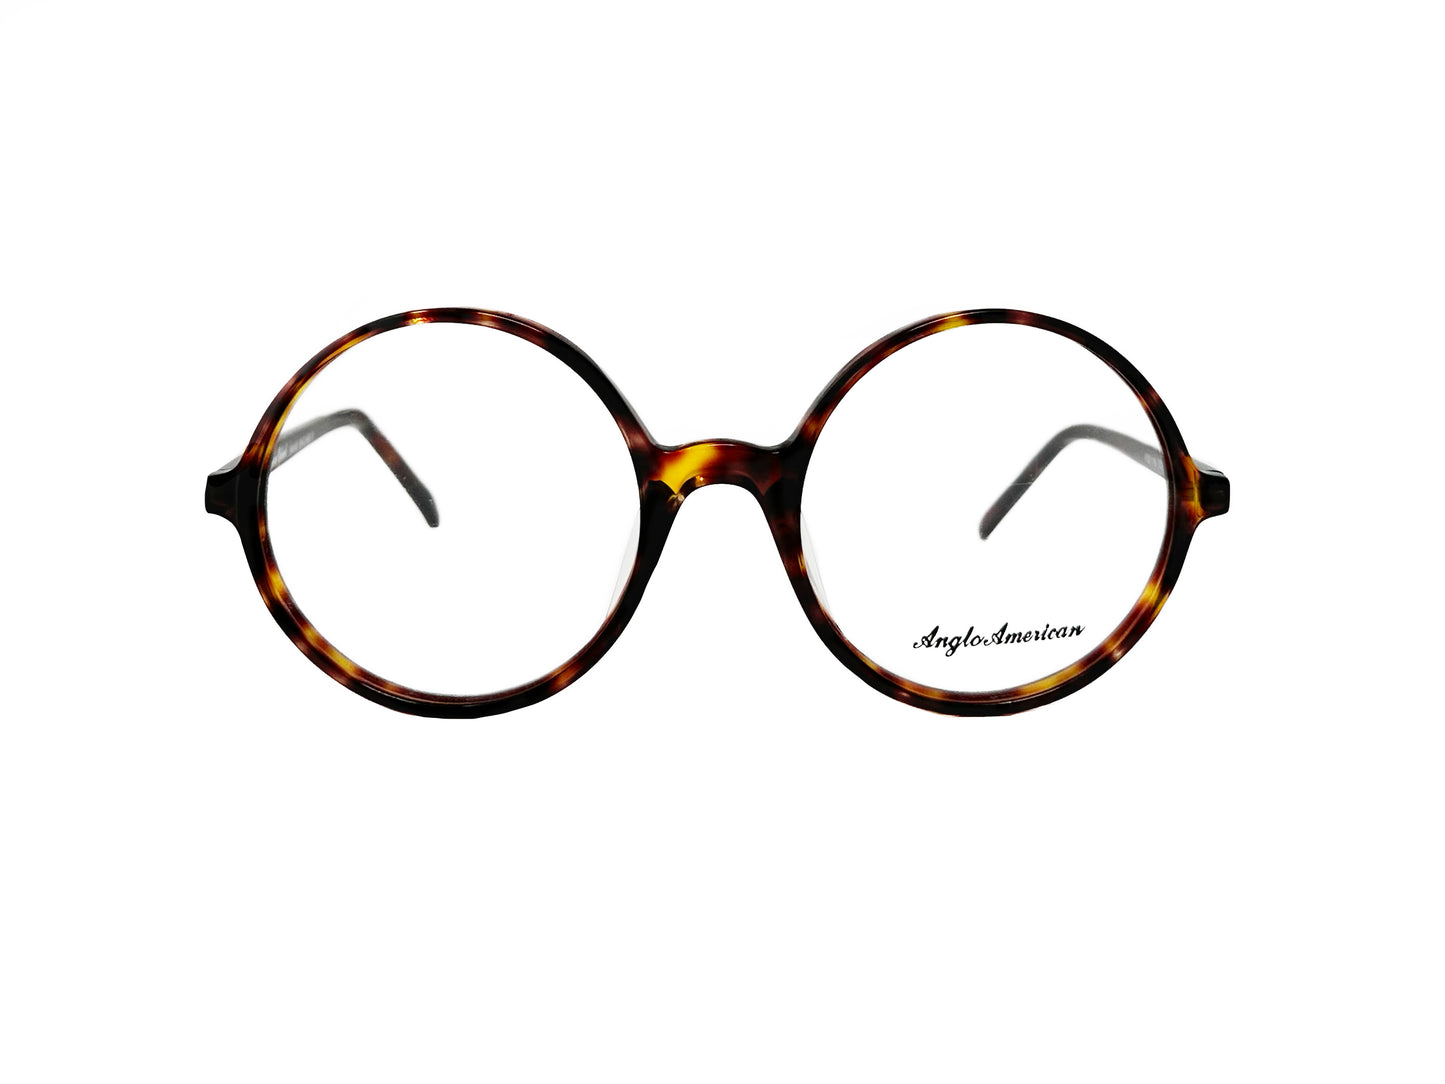 Anglo American Optical round, acetate optical frame. Model: 116. Color: TO - Tortoise. Front view.